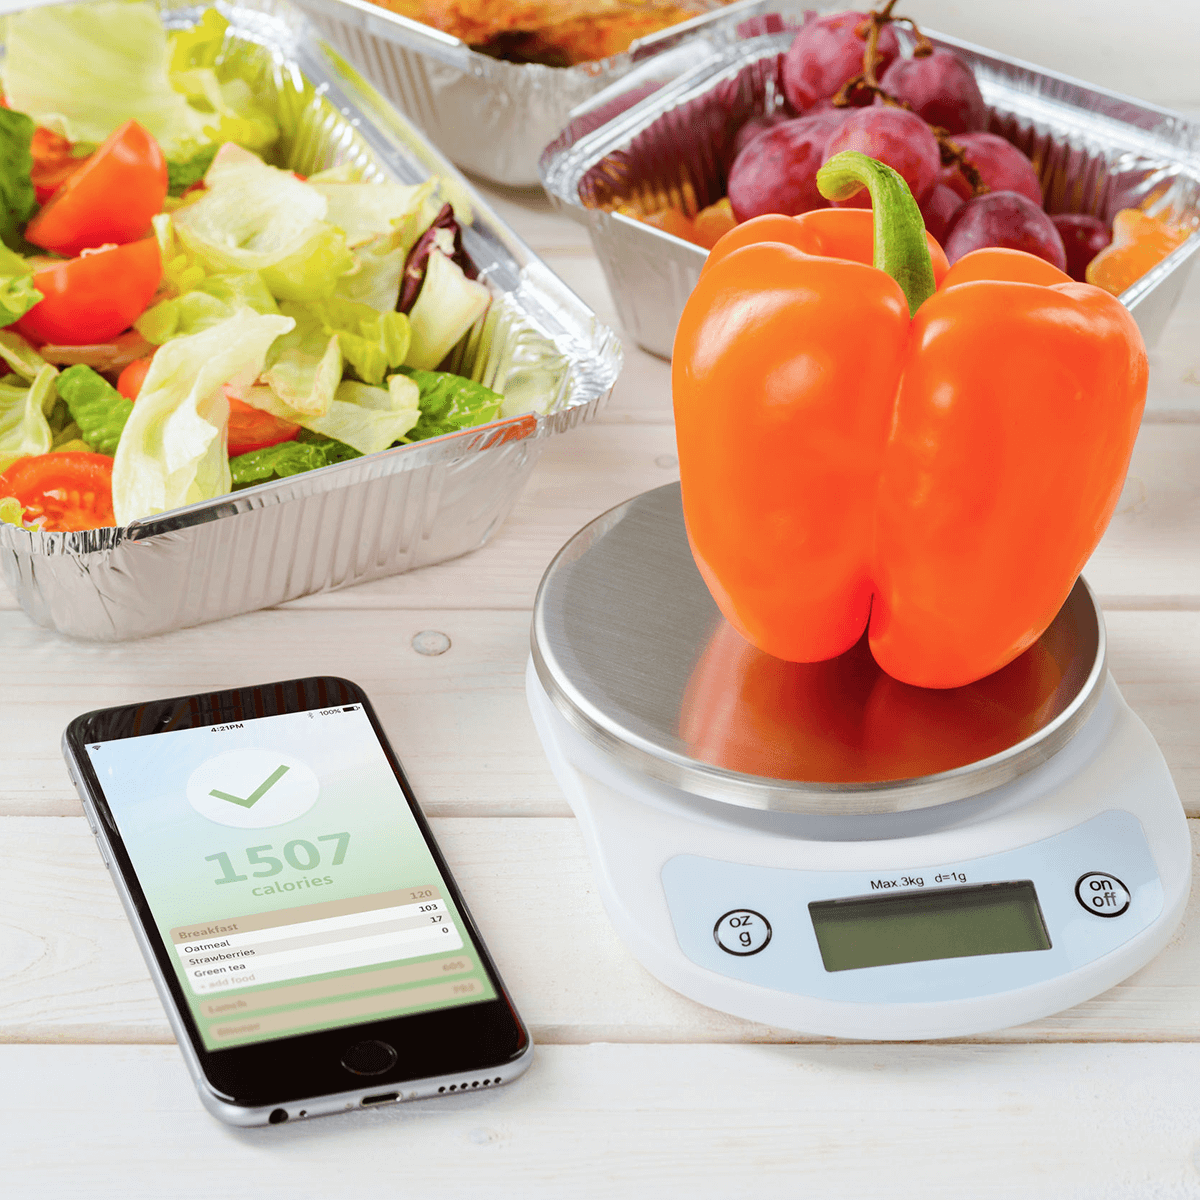 Image of a calorie tracking app and healthy foods.